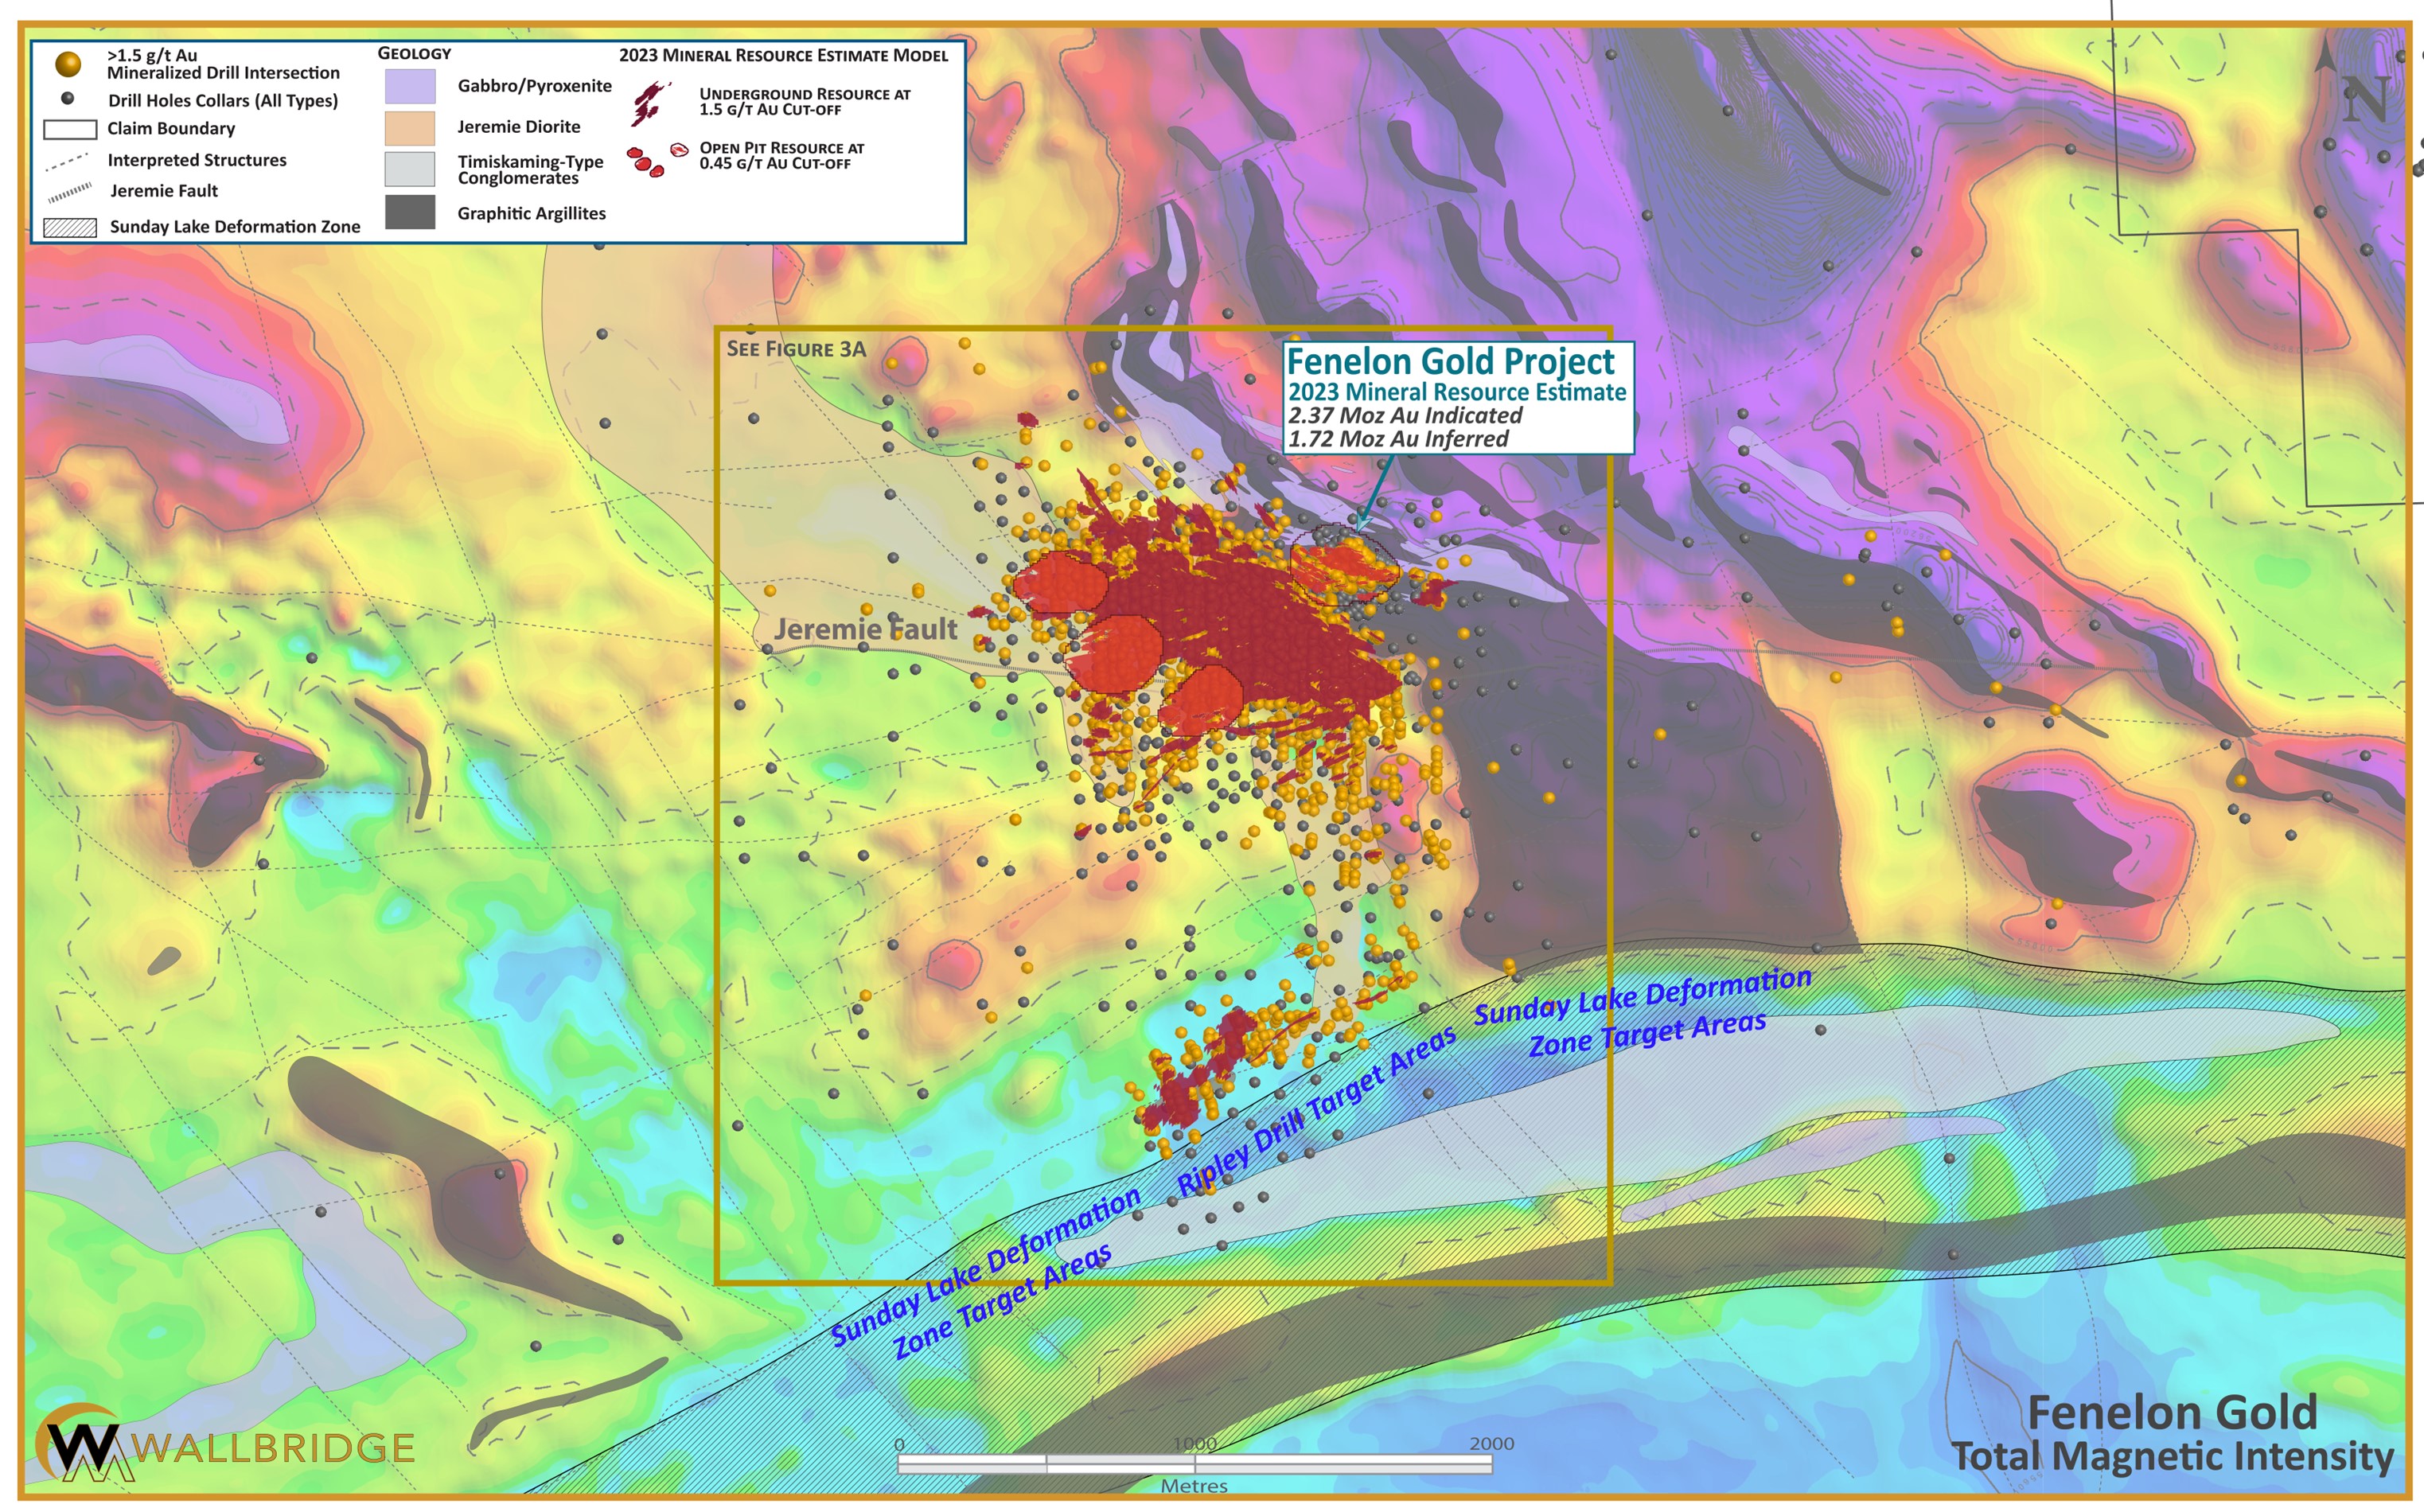 Figure 2. Fenelon Gold, Total Magnetic Intensity and Geology